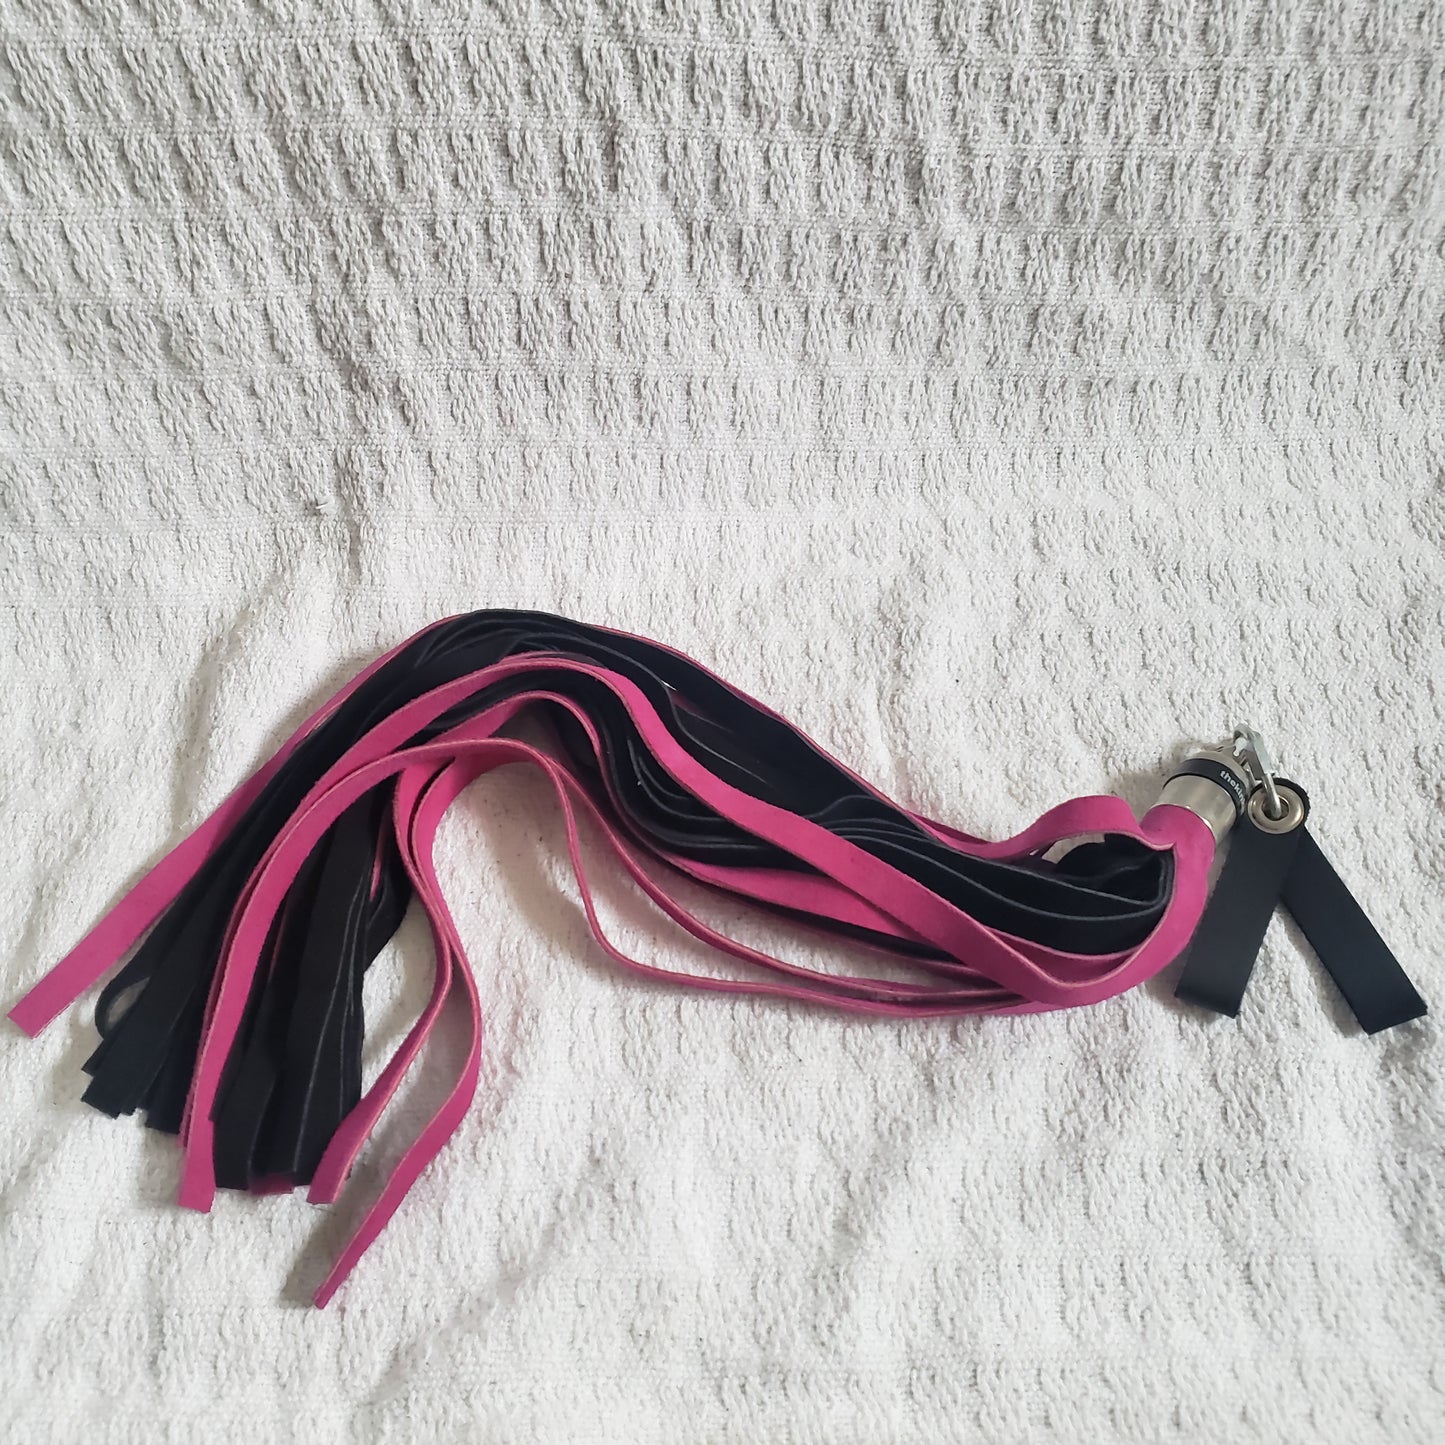 The fuchsia and black suede finger loop flogger.